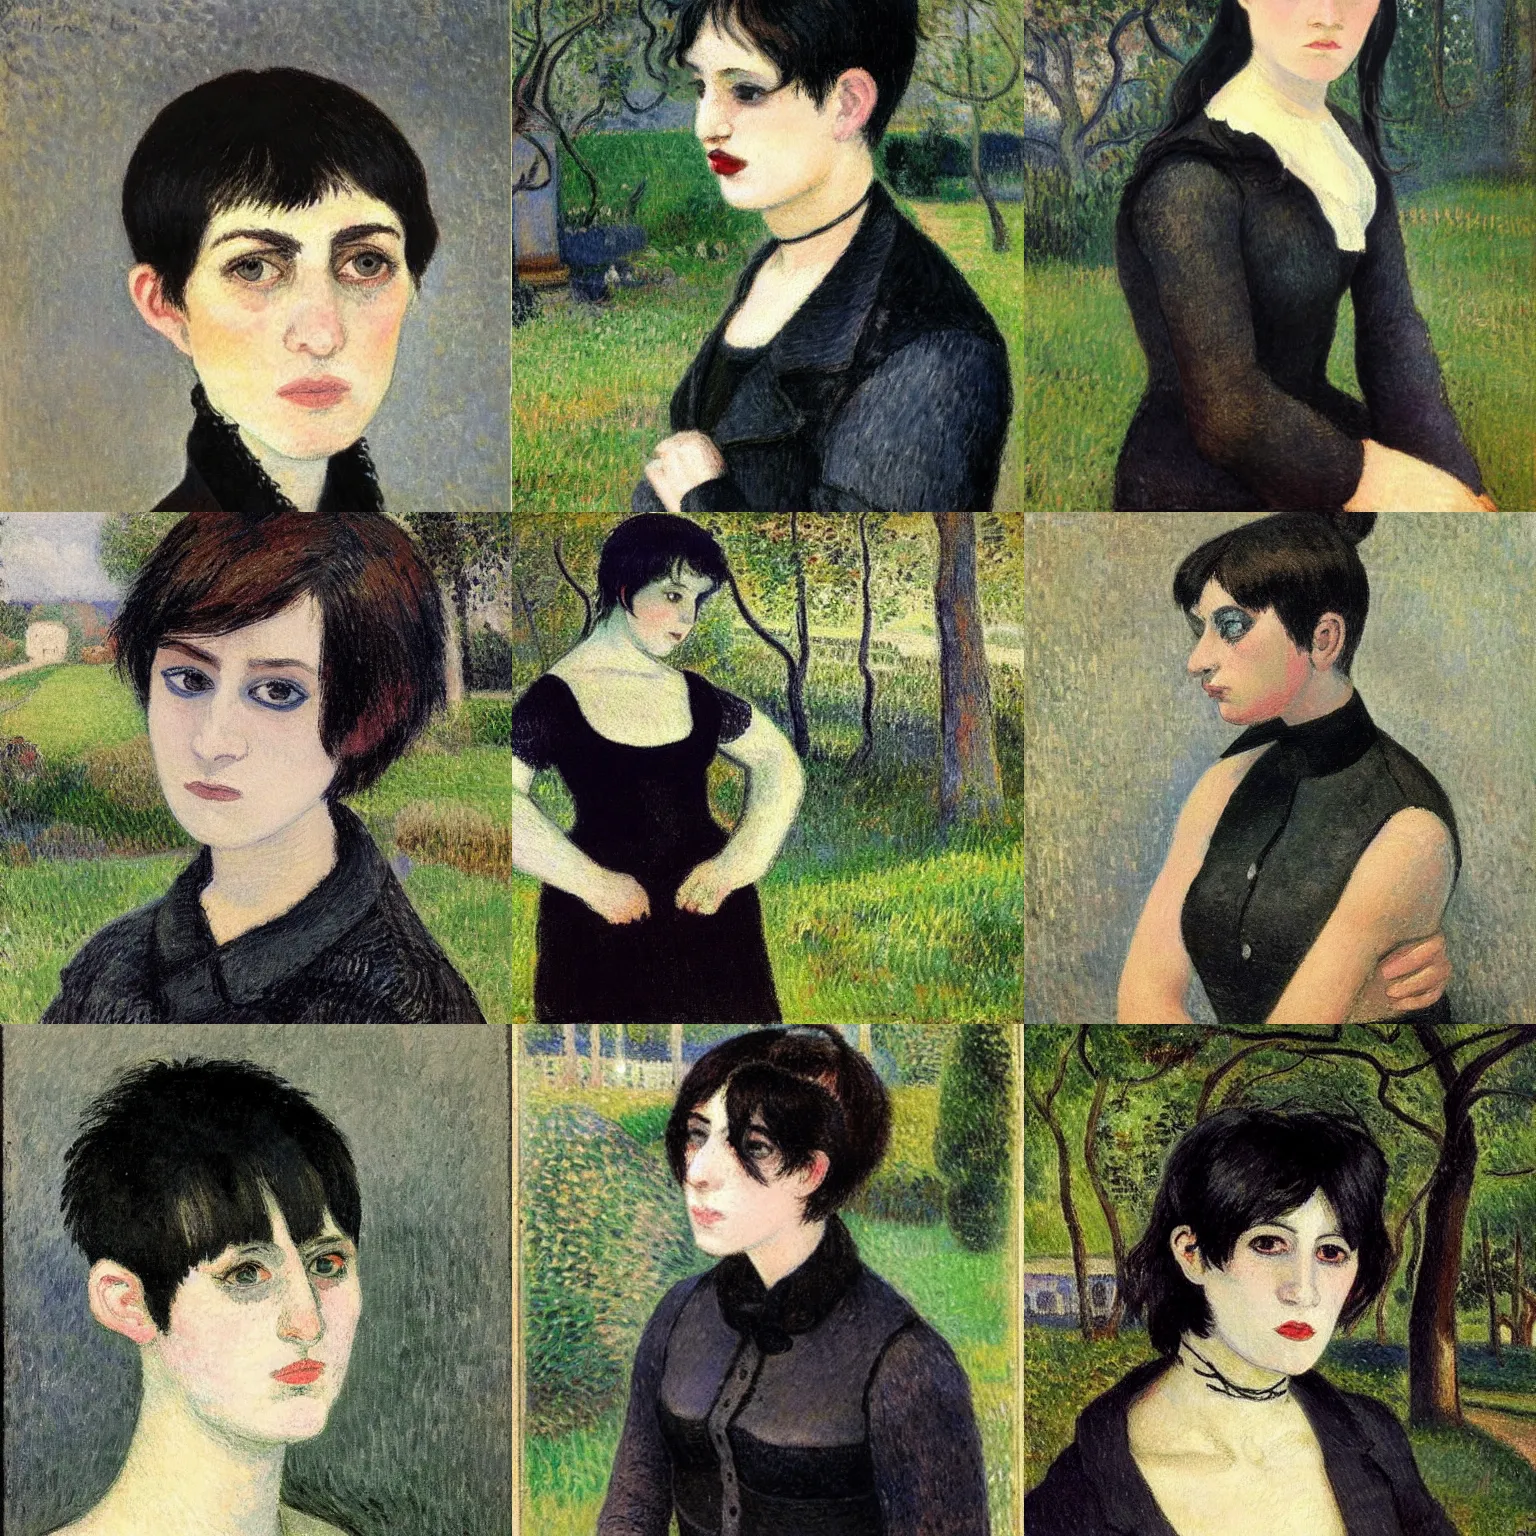 Prompt: A goth painted by Camille Pissarro. Her hair is dark brown and cut into a short, messy pixie cut. She has a slightly rounded face, with a pointed chin, large entirely-black eyes, and a small nose. She is wearing a black tank top, a black leather jacket, a black knee-length skirt, a black choker, and black leather boots.